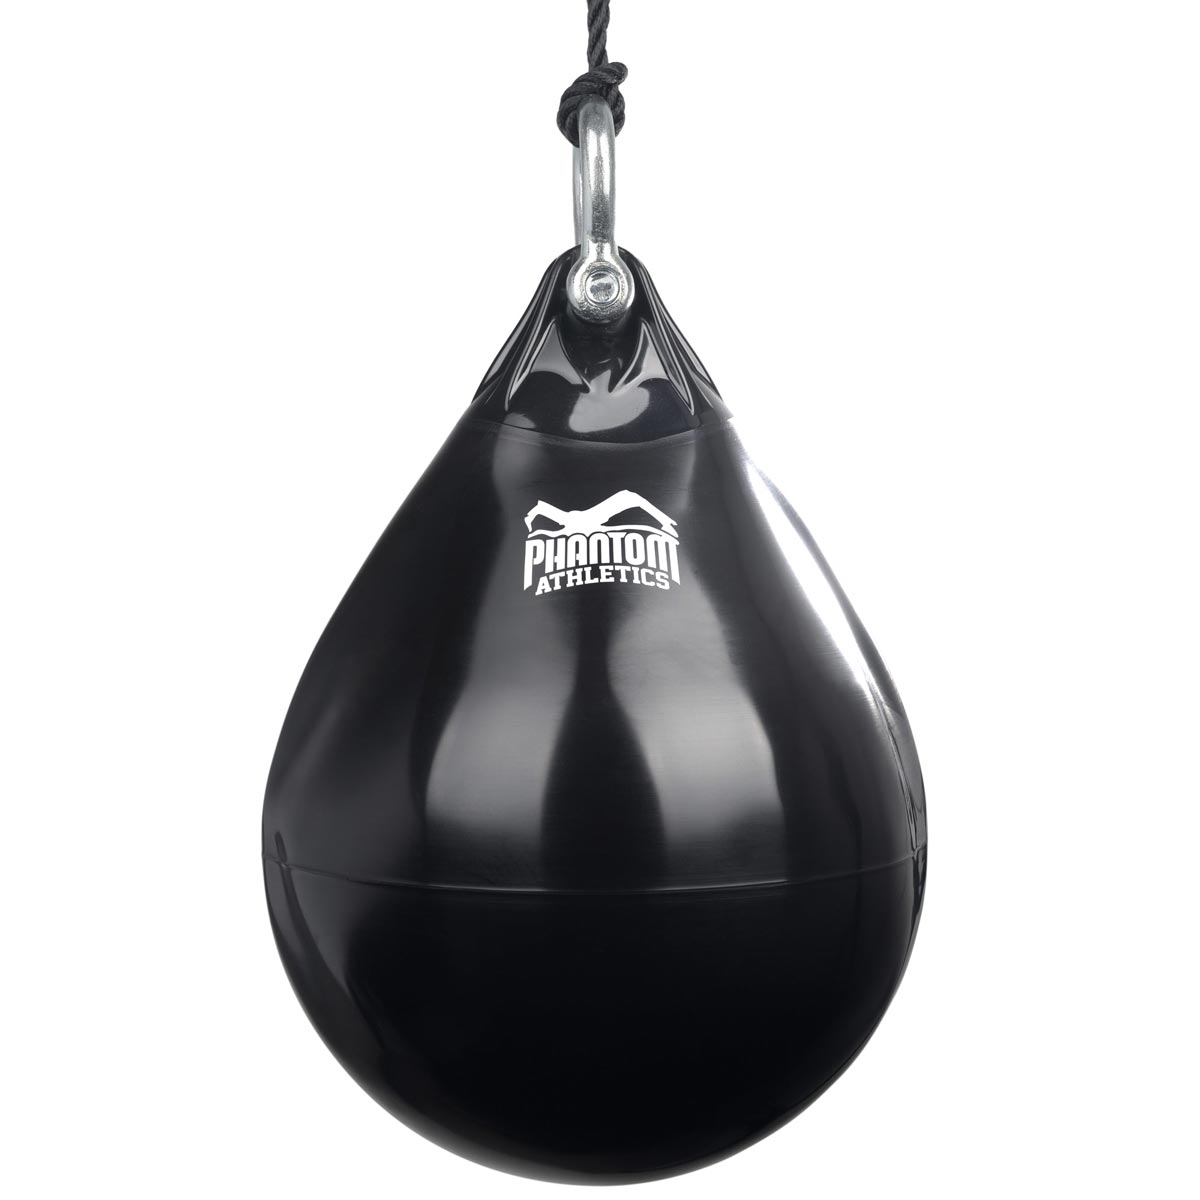 Buy Hydro punching bag - Aqua bag filled with water in a pear shape -  PHANTOM ATHLETICS